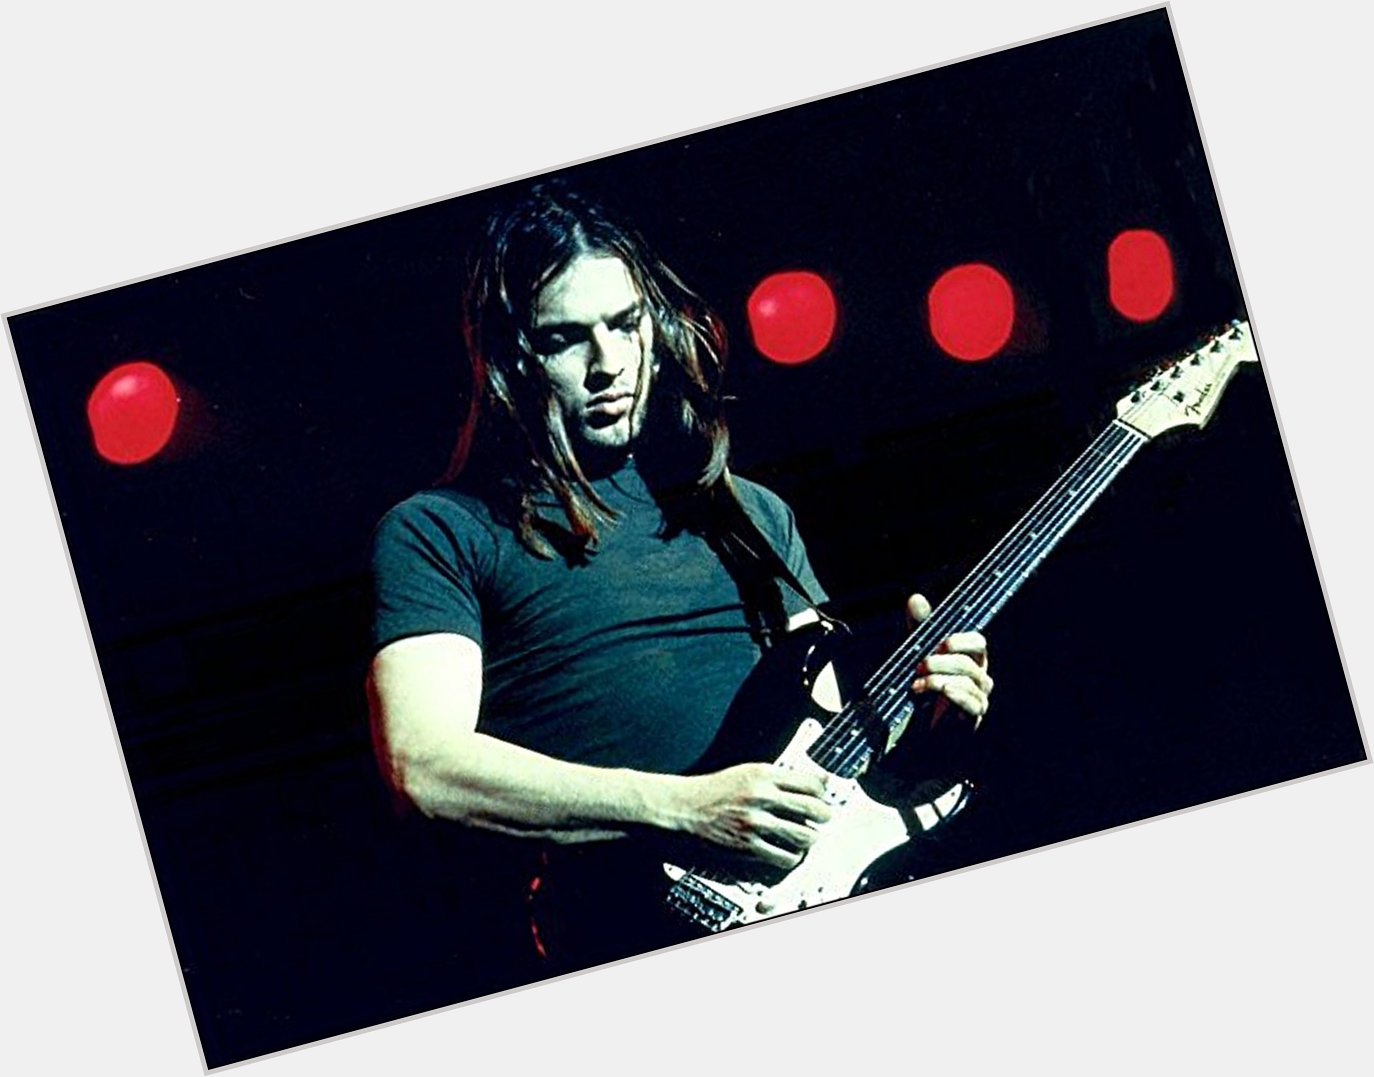 Happy birthday to David Gilmour, member of Pink Floyd and an absolute fucking legend. 